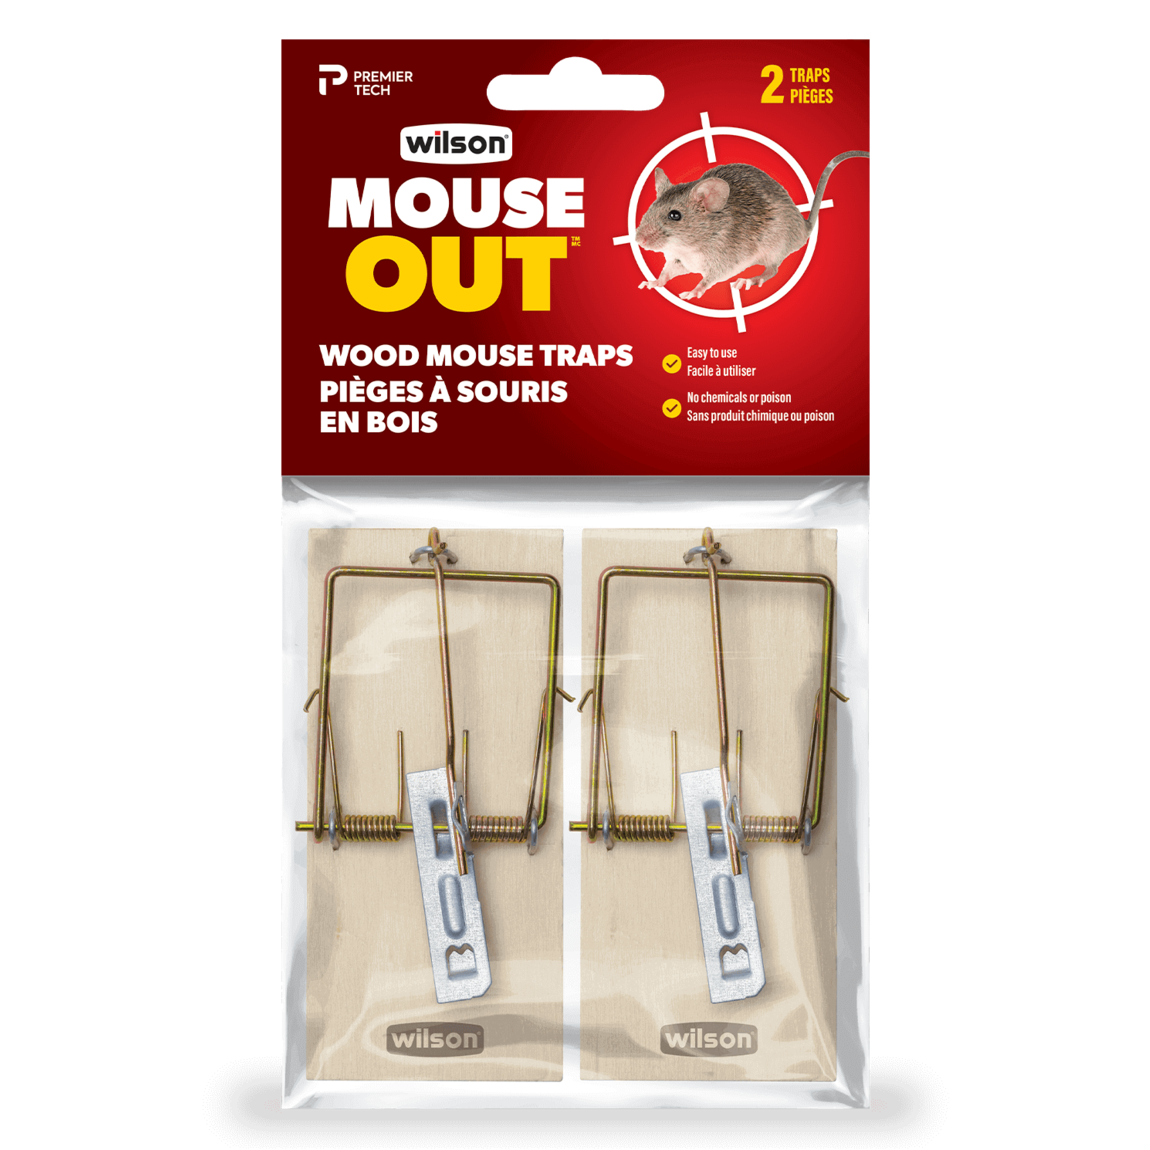 https://www.wilsoncontrol.com/sites/ptgc_wilson/files/styles/swiper_gallery_image/public/2022-01/wilson-mouse-out-wood-mouse-traps-2traps.png?itok=5f0VClFH